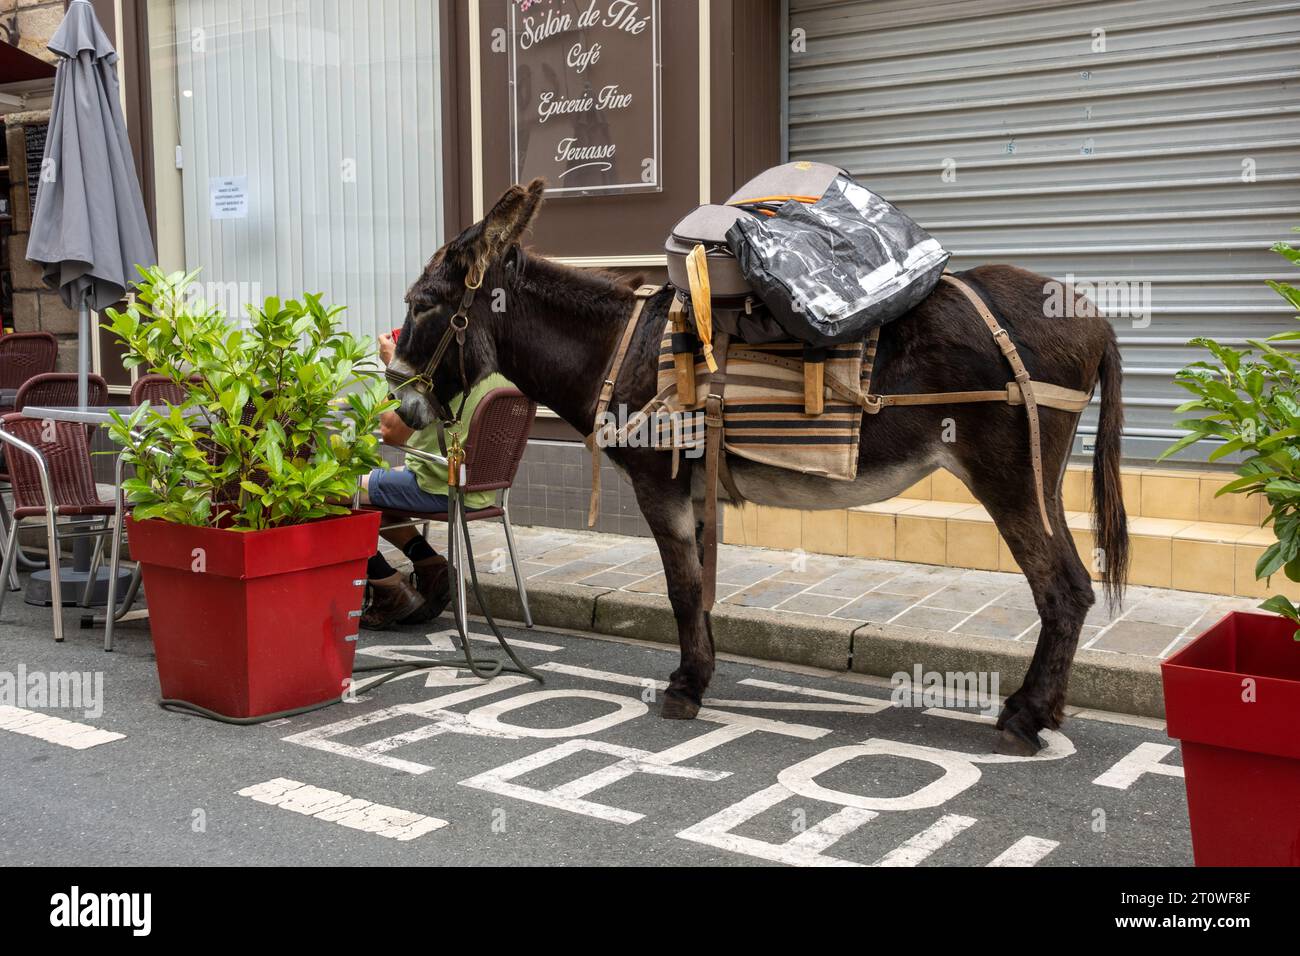 A donkey in market town of La Chatre in the South East of the Indre department, France Stock Photo